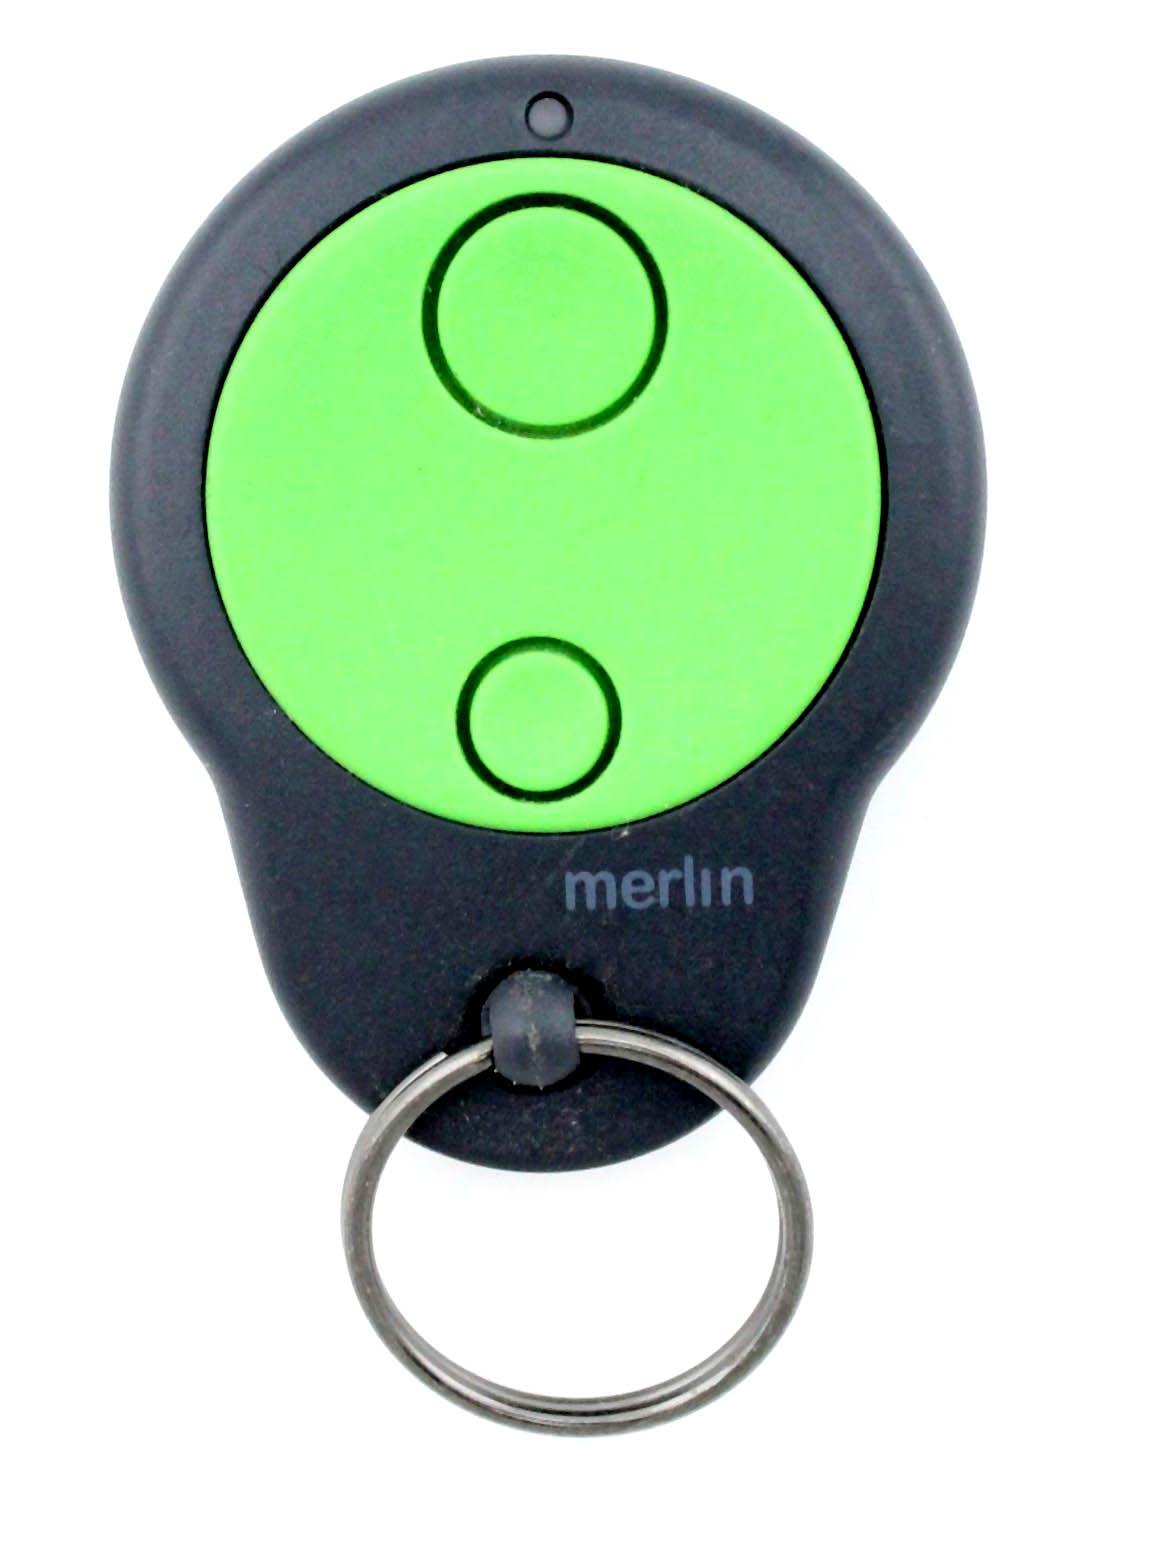 Merlin M842 Series Garage Remote - China Air Conditioner Remotes :: Cheapest AC Remote Solutions